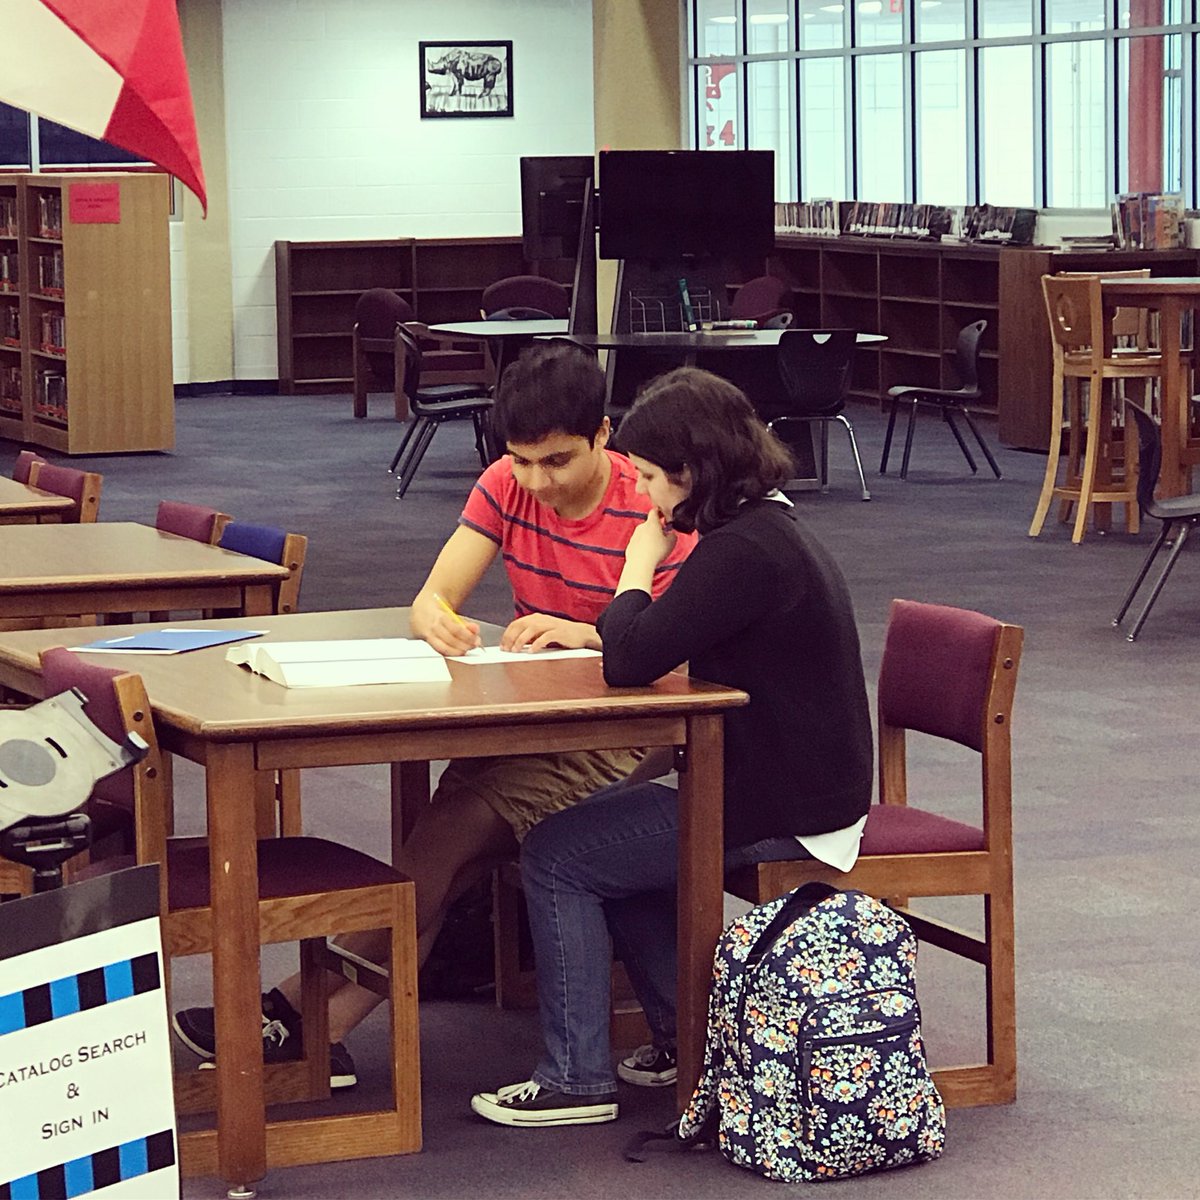 Just so we’re clear: it’s this valedictorian’s last day of hs, everyone has left the building, and he’s in here tutoring an underclassmen for her finals tomorrow. #GHSUnity #whoscuttingonionsinhere 😭😭😭